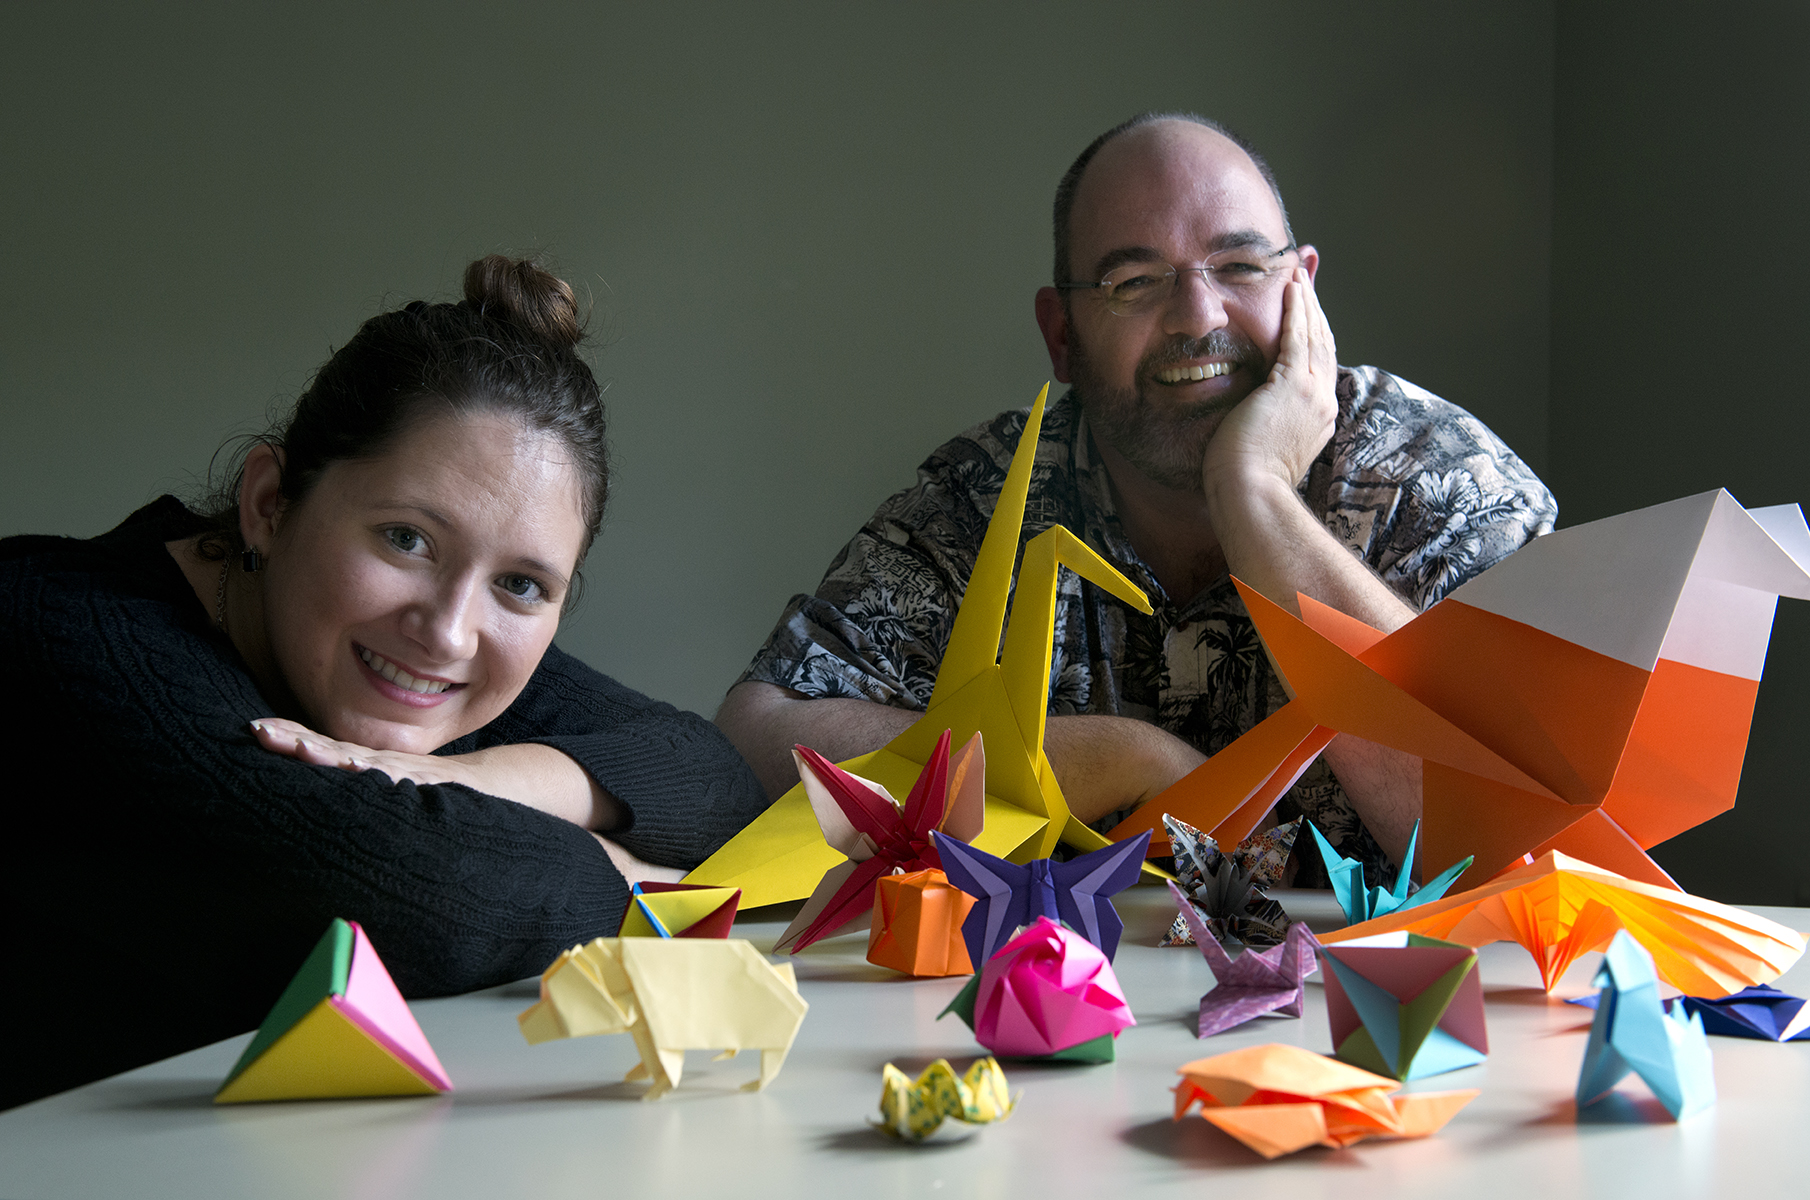 Elon senior Lainey McQuain poses with her research mentor, associate professor of mathematics Alan Russell. The pair is researching using origami to teach students better writing methods.